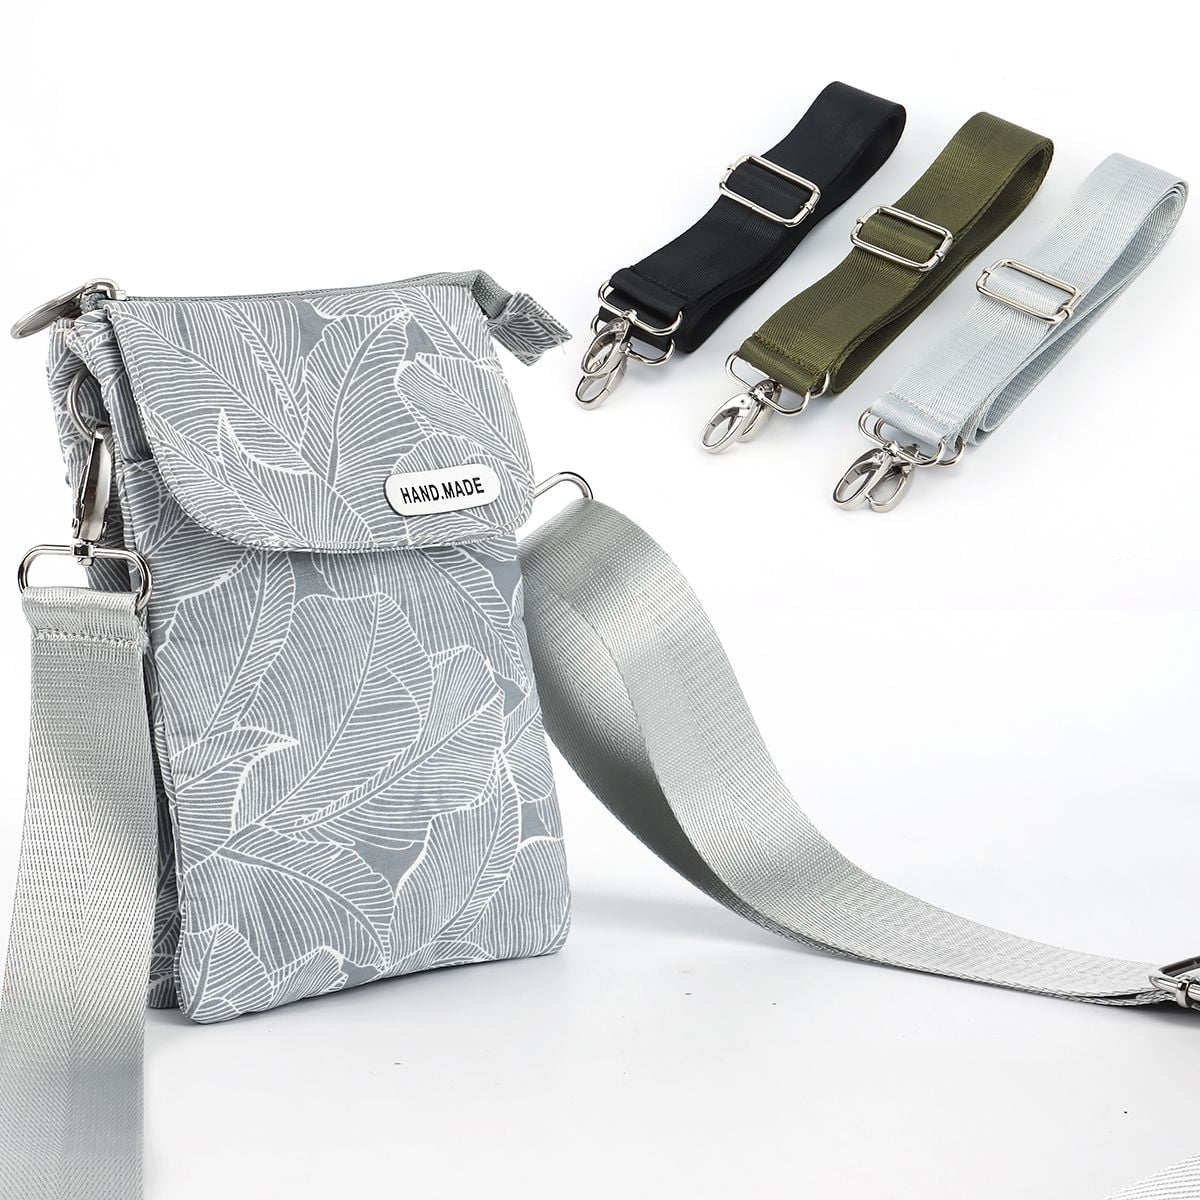 Bag Straps (Wide) - Silver Fittings - Available in more styles